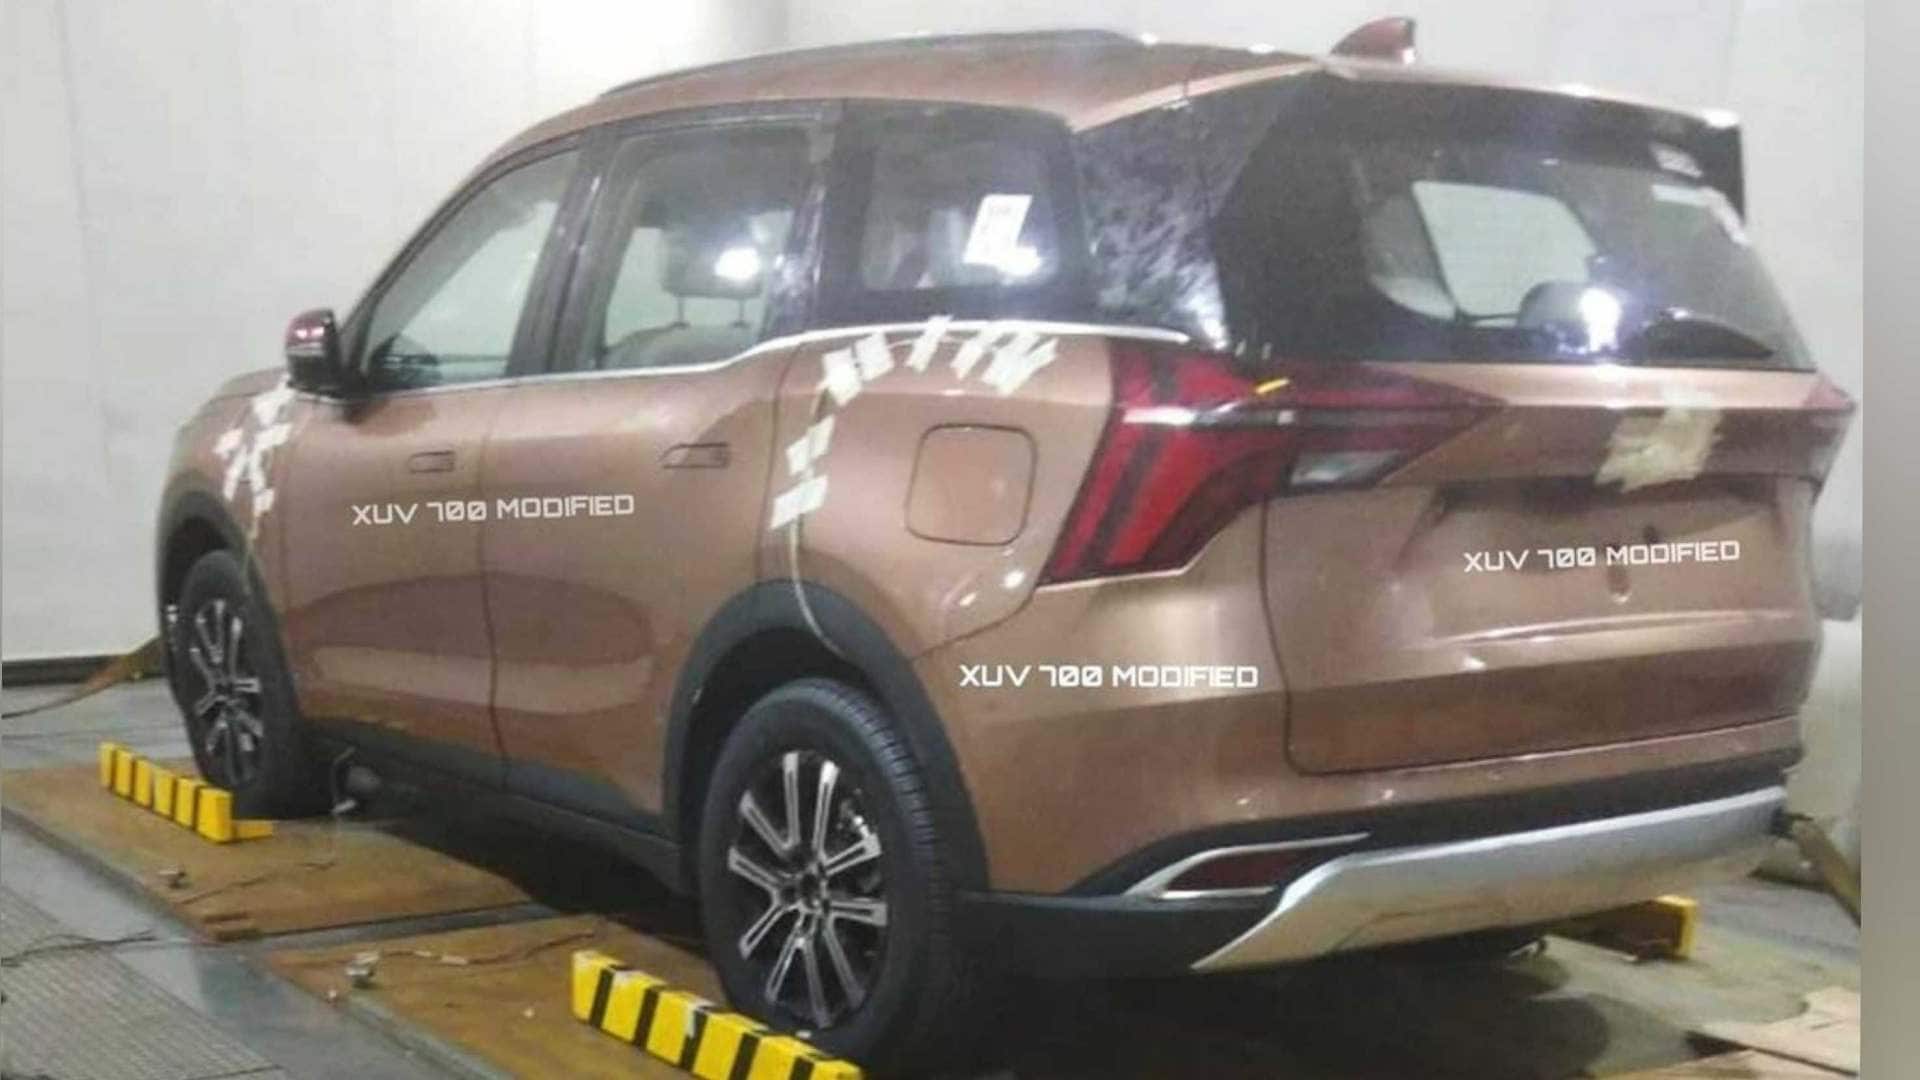 The Mahindra XUV700 is expected to debut sometime in August. Image: XUV700 Modified via Instagram